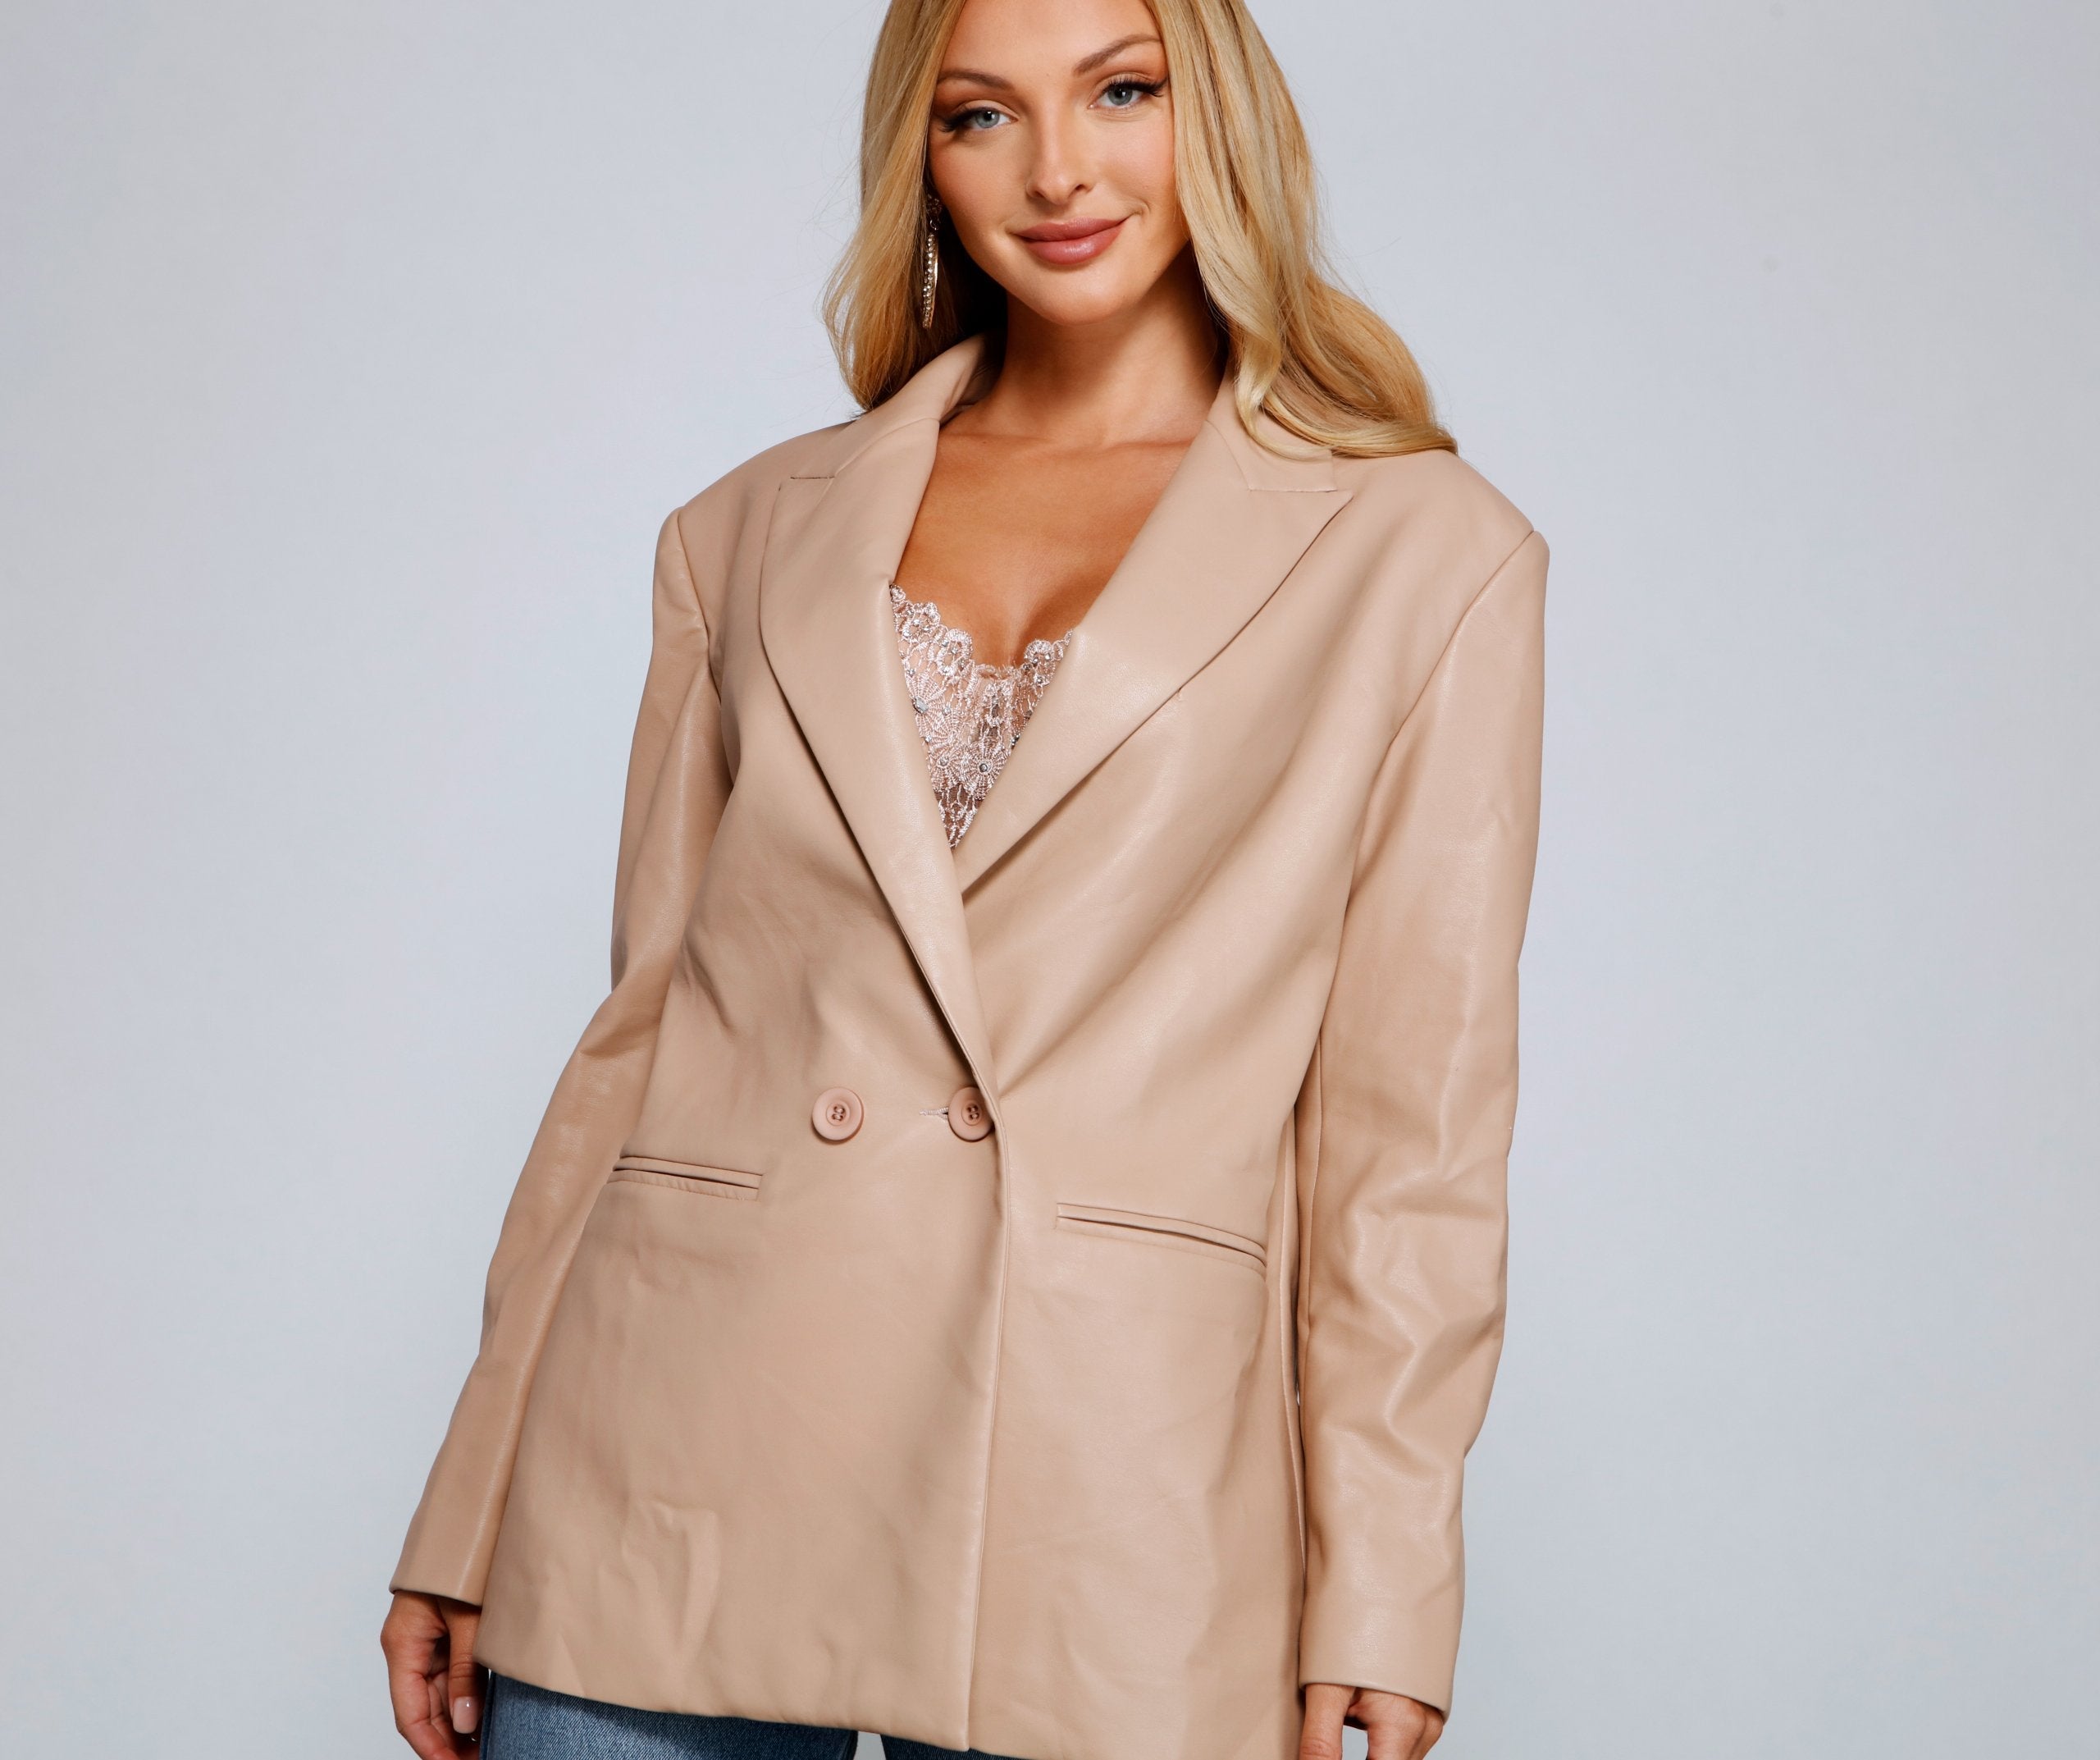 Trendy Oversized Faux Leather Blazer - Lady Occasions